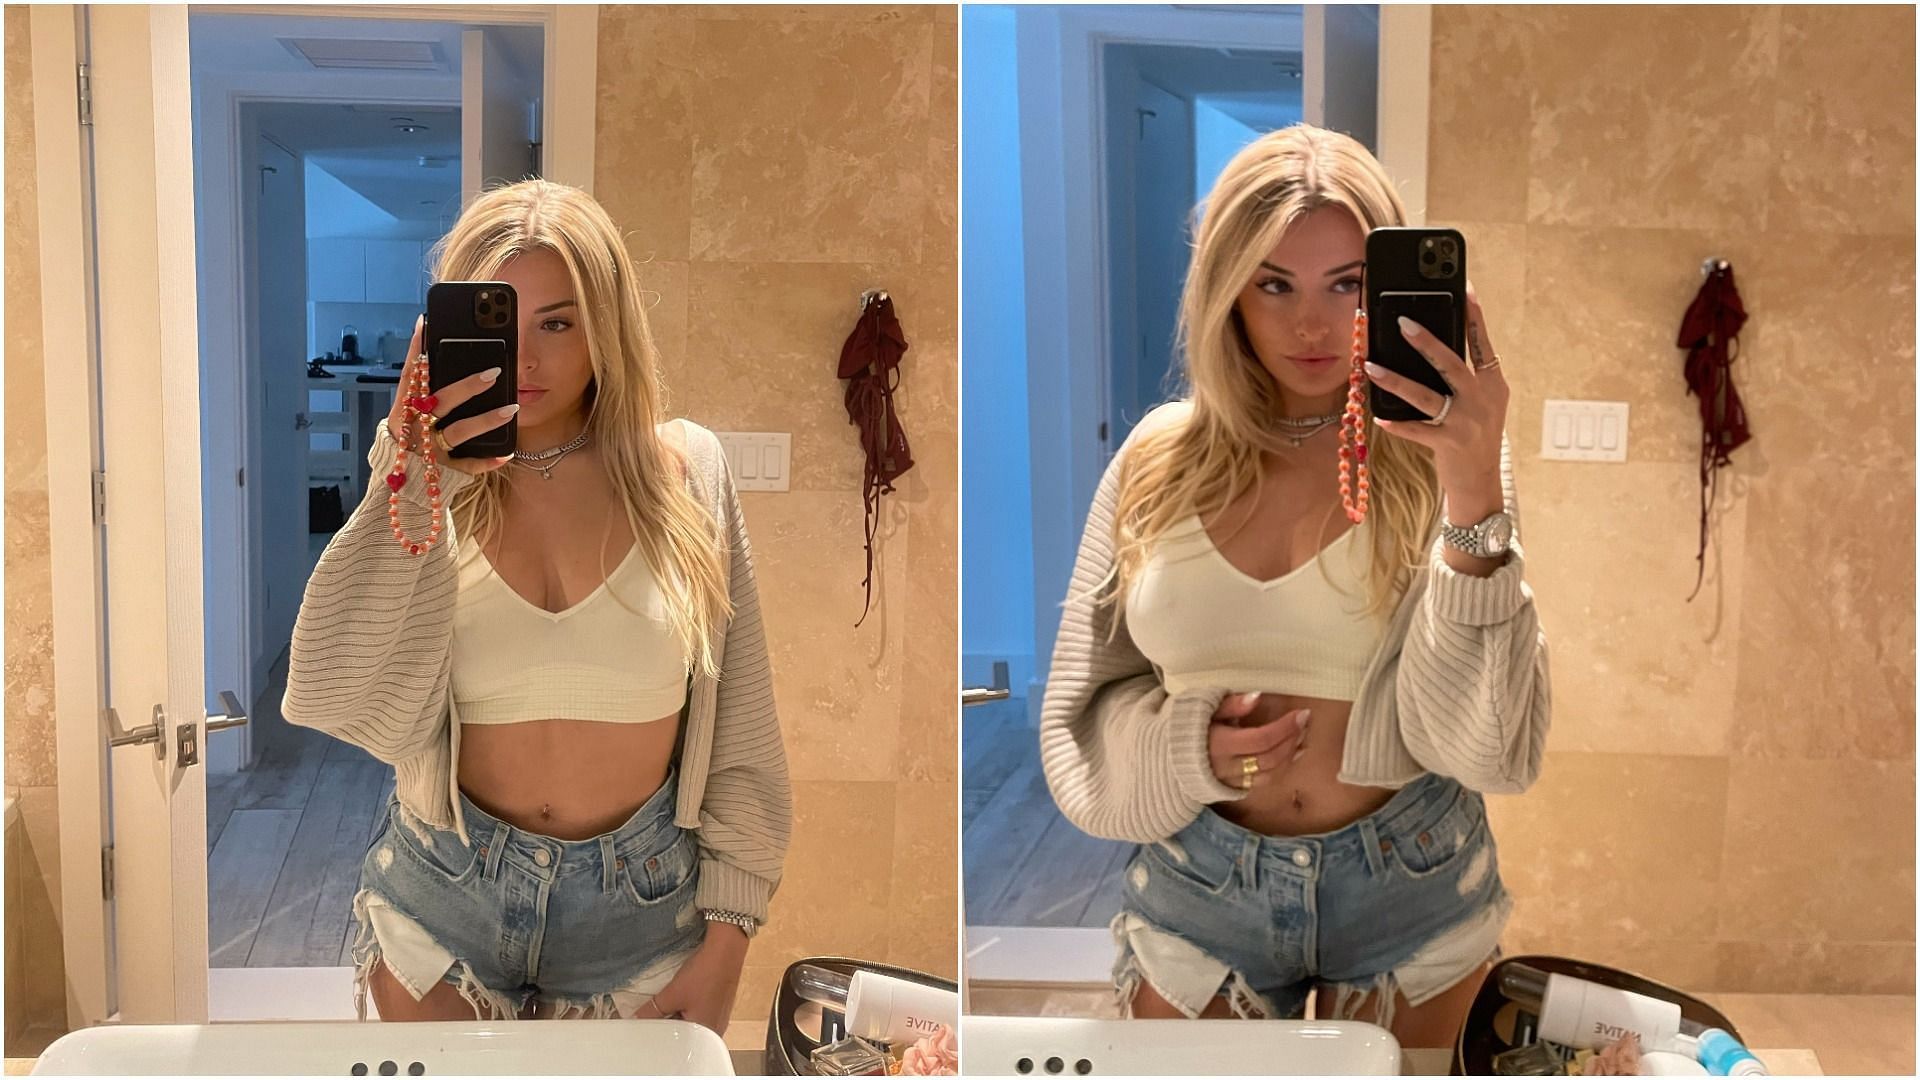 Hot tub streamer Corinna Kopf was banned from the platform due to &#039;inappropriate attire&#039; (Image via- Pouty girl/Twitter)